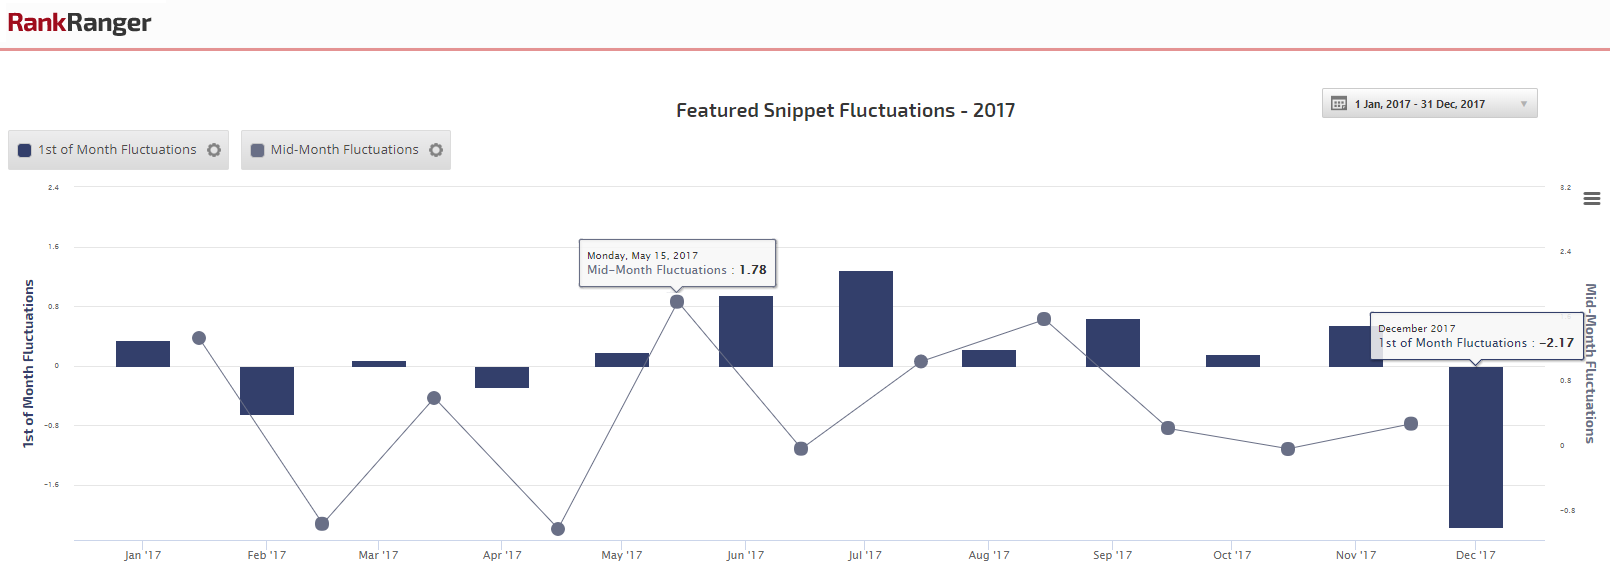 2017 Featured Snippet Fluctuations 